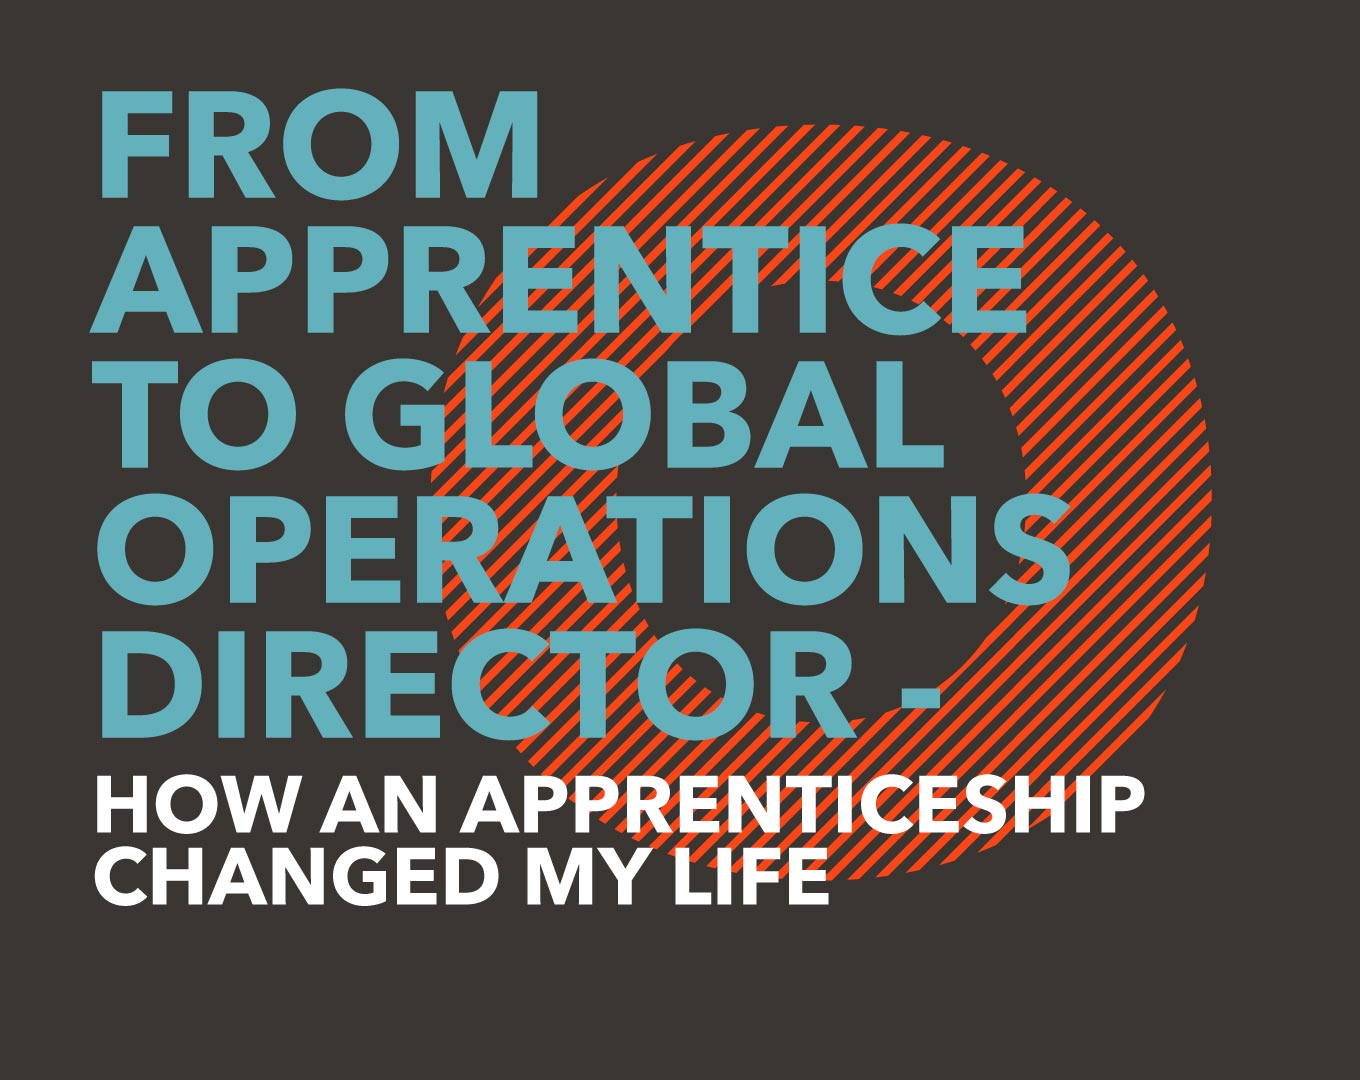 From apprentice to global operations director — how an apprenticeship changed my life